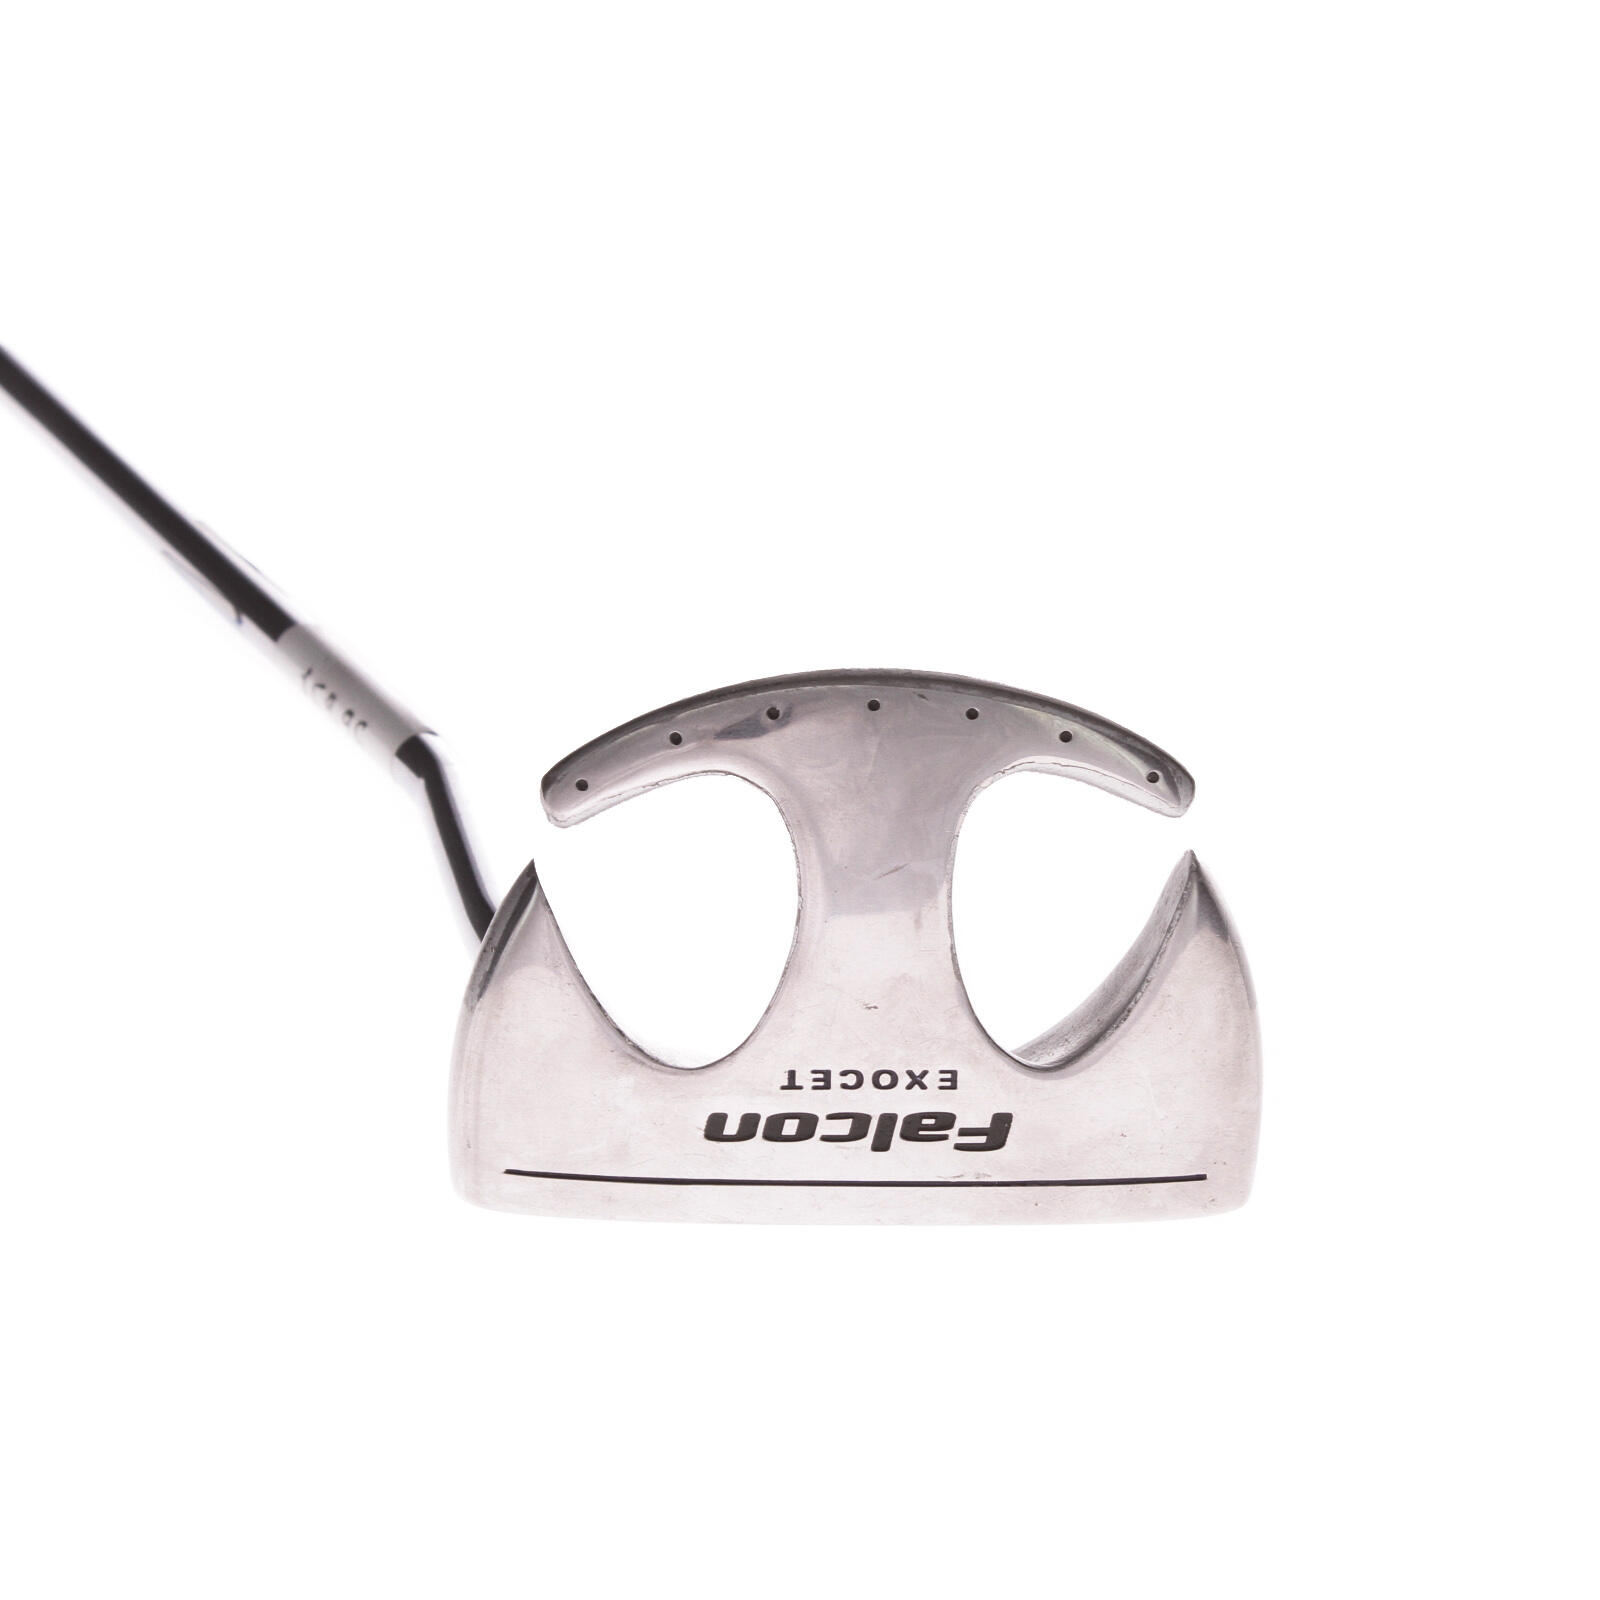 USED - Falcon Exocet Putter 34 Inches Length Steel Shaft Right Handed - GRADE B 1/6